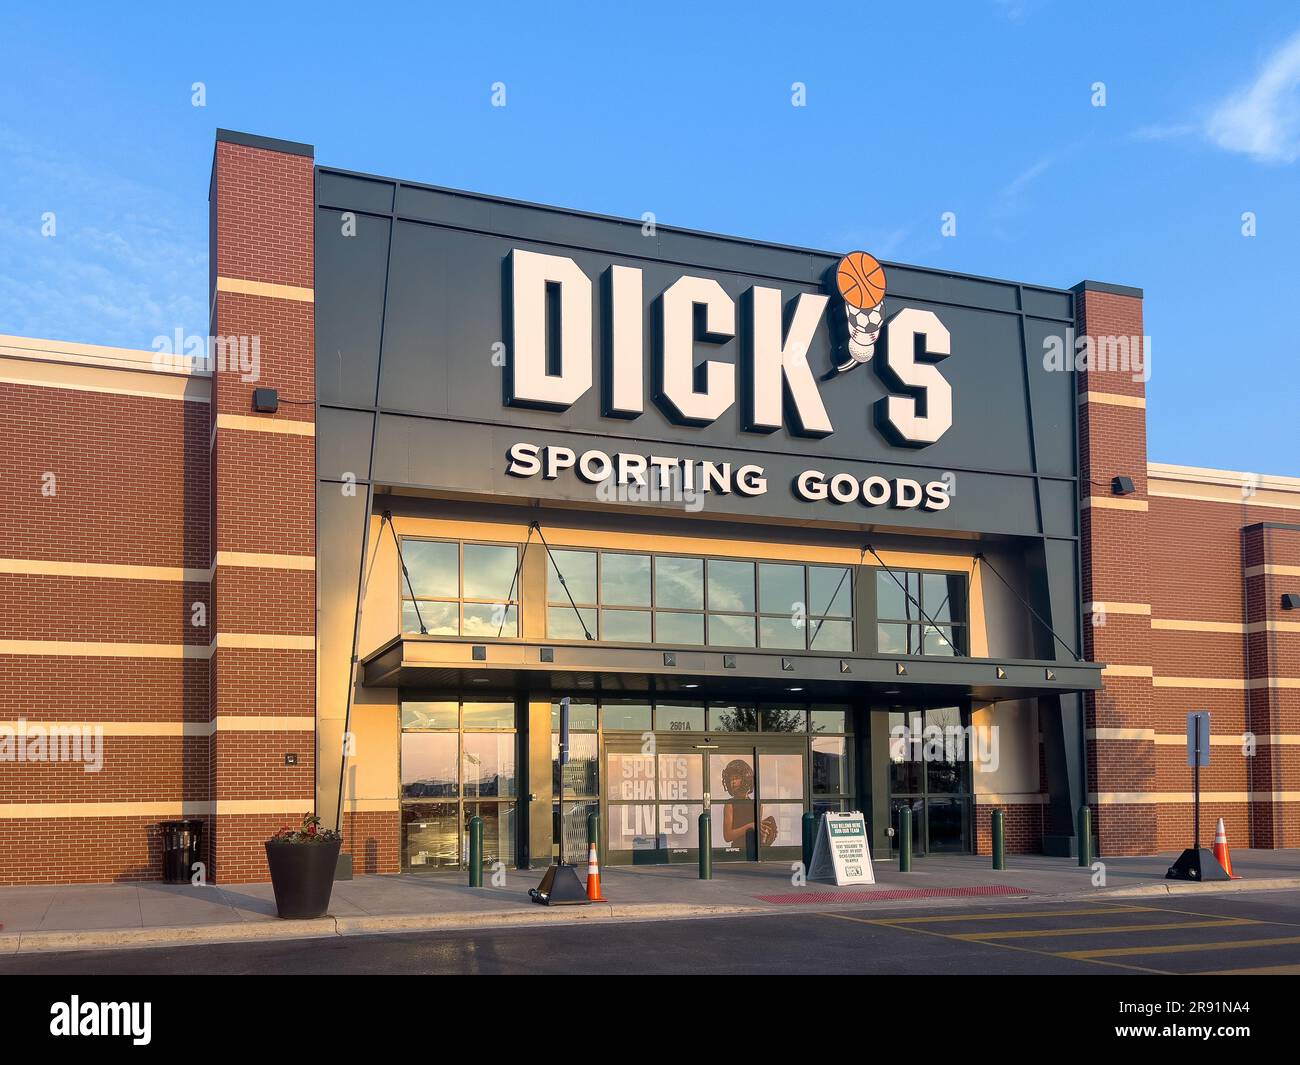 Best Hunting and Fishing Store 2018 - Dick's Sporting Goods - The